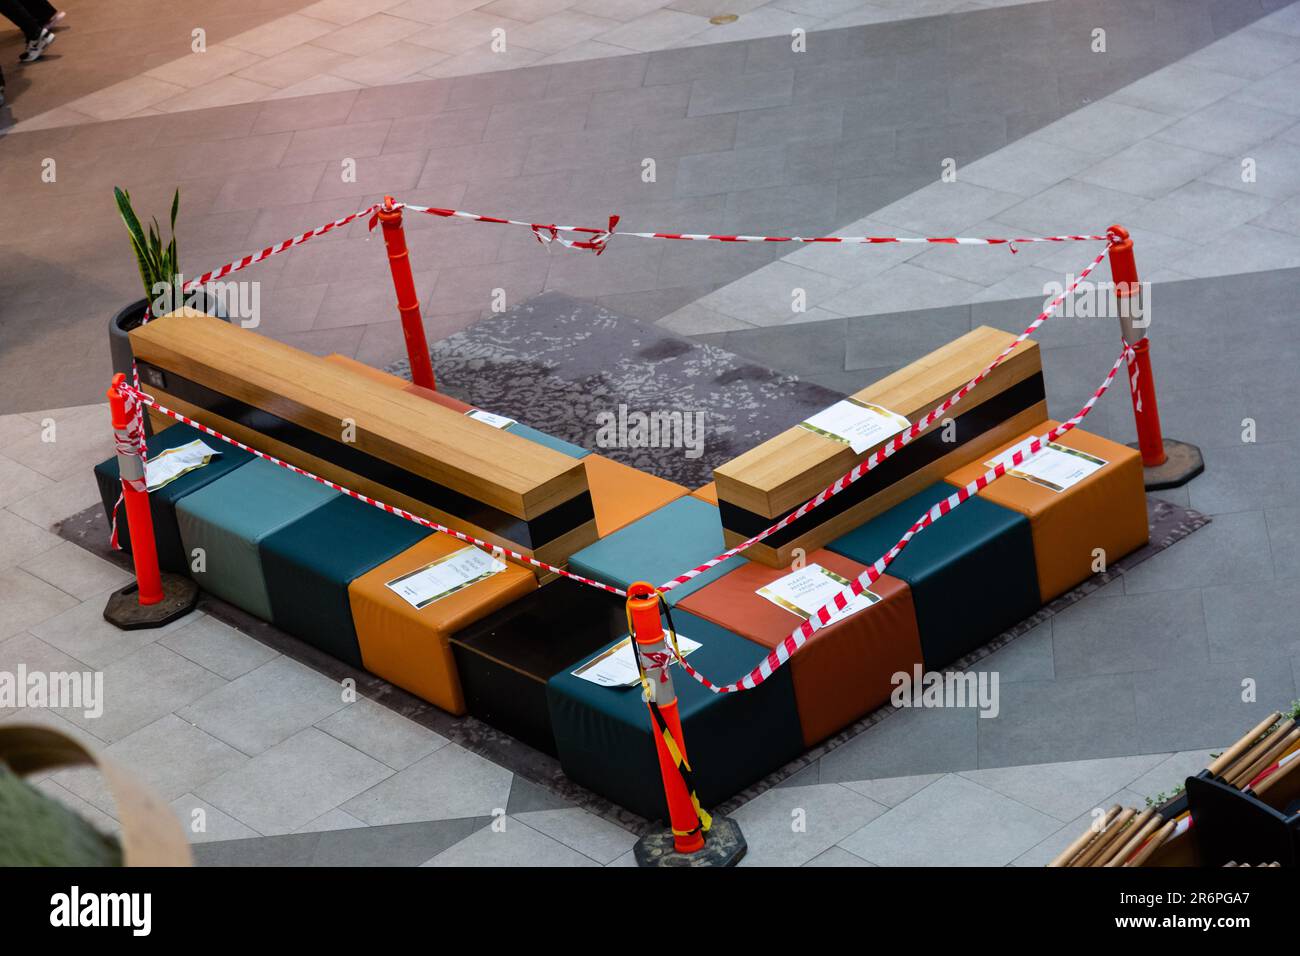 MELBOURNE, AUSTRALIA - APRIL 29: Public seatging is taped off in The Greensborough Plaza during COVID 19 on 29 April, 2020 in Melbourne, Australia. Stock Photo